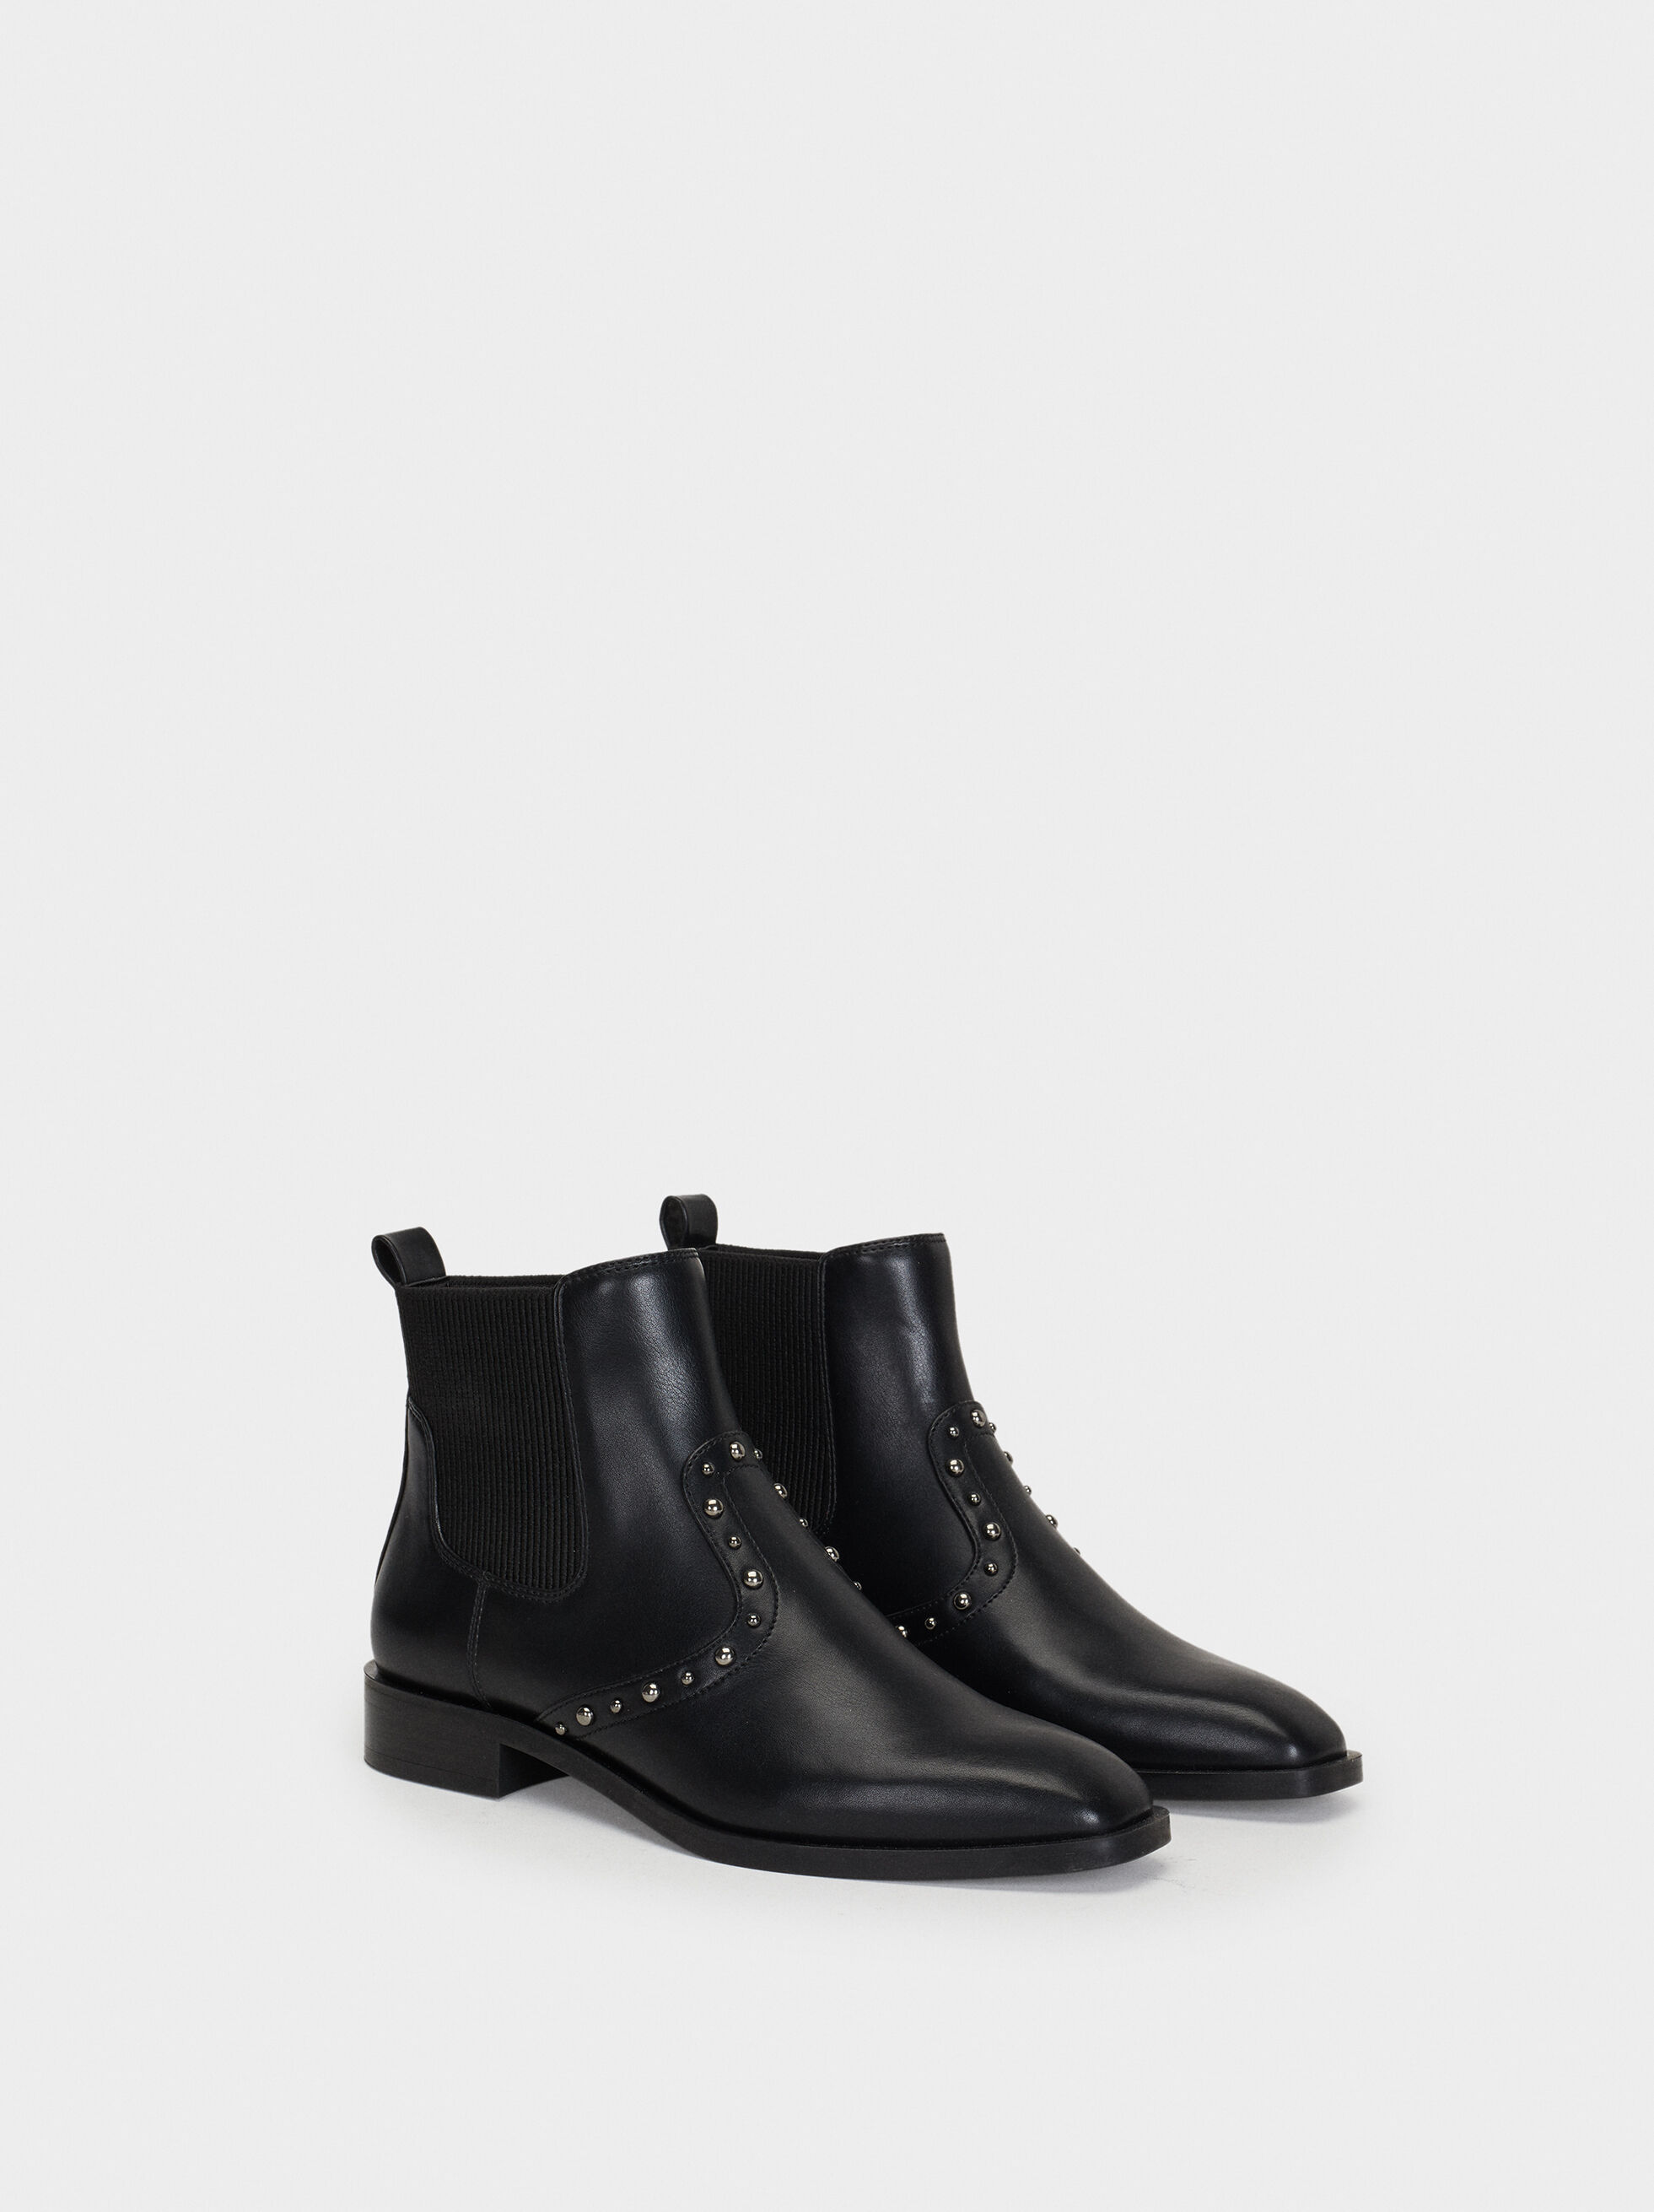 black chelsea boots studded